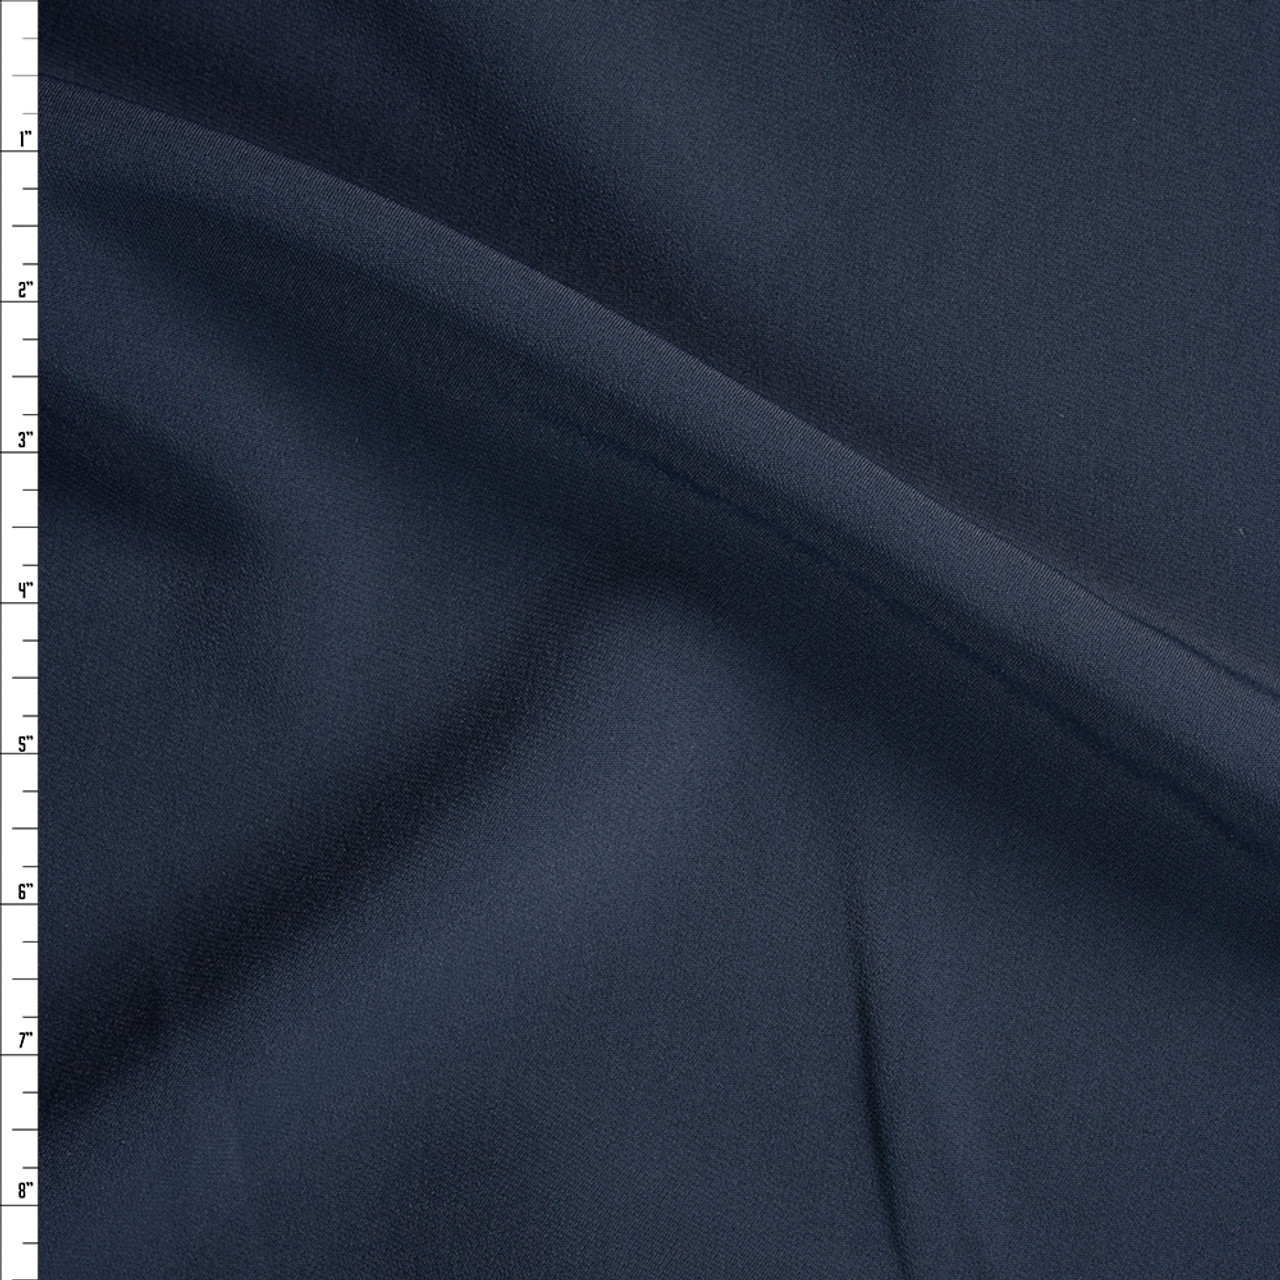 Cali Fabrics Navy Midweight Stretch Suiting Fabric by the Yard